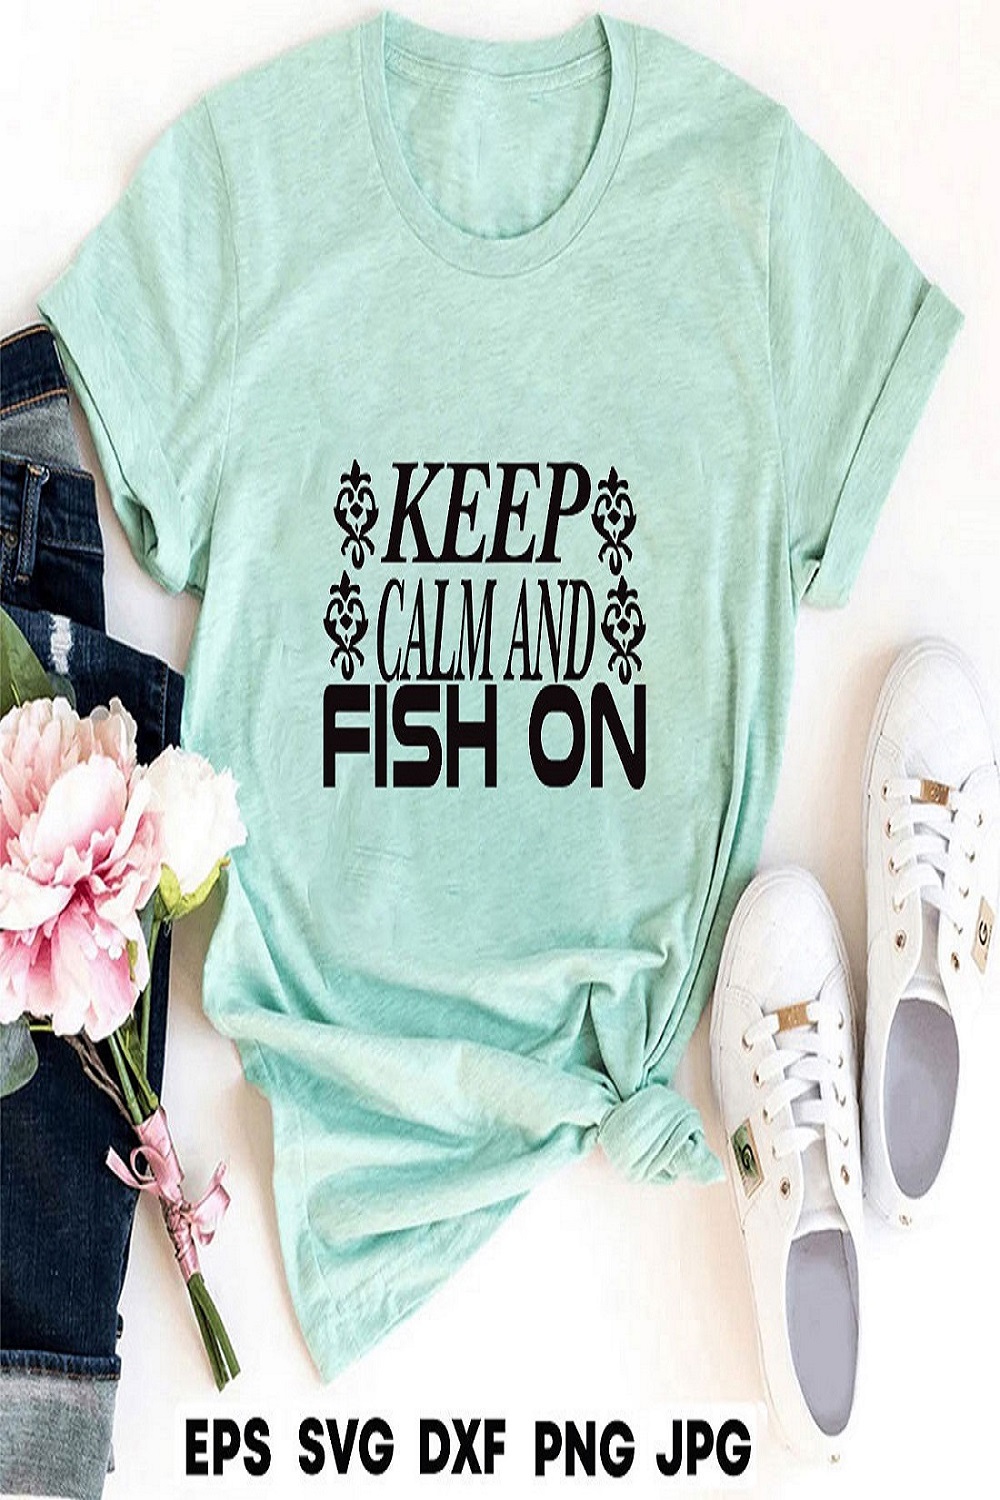 Keep calm and fish on pinterest preview image.